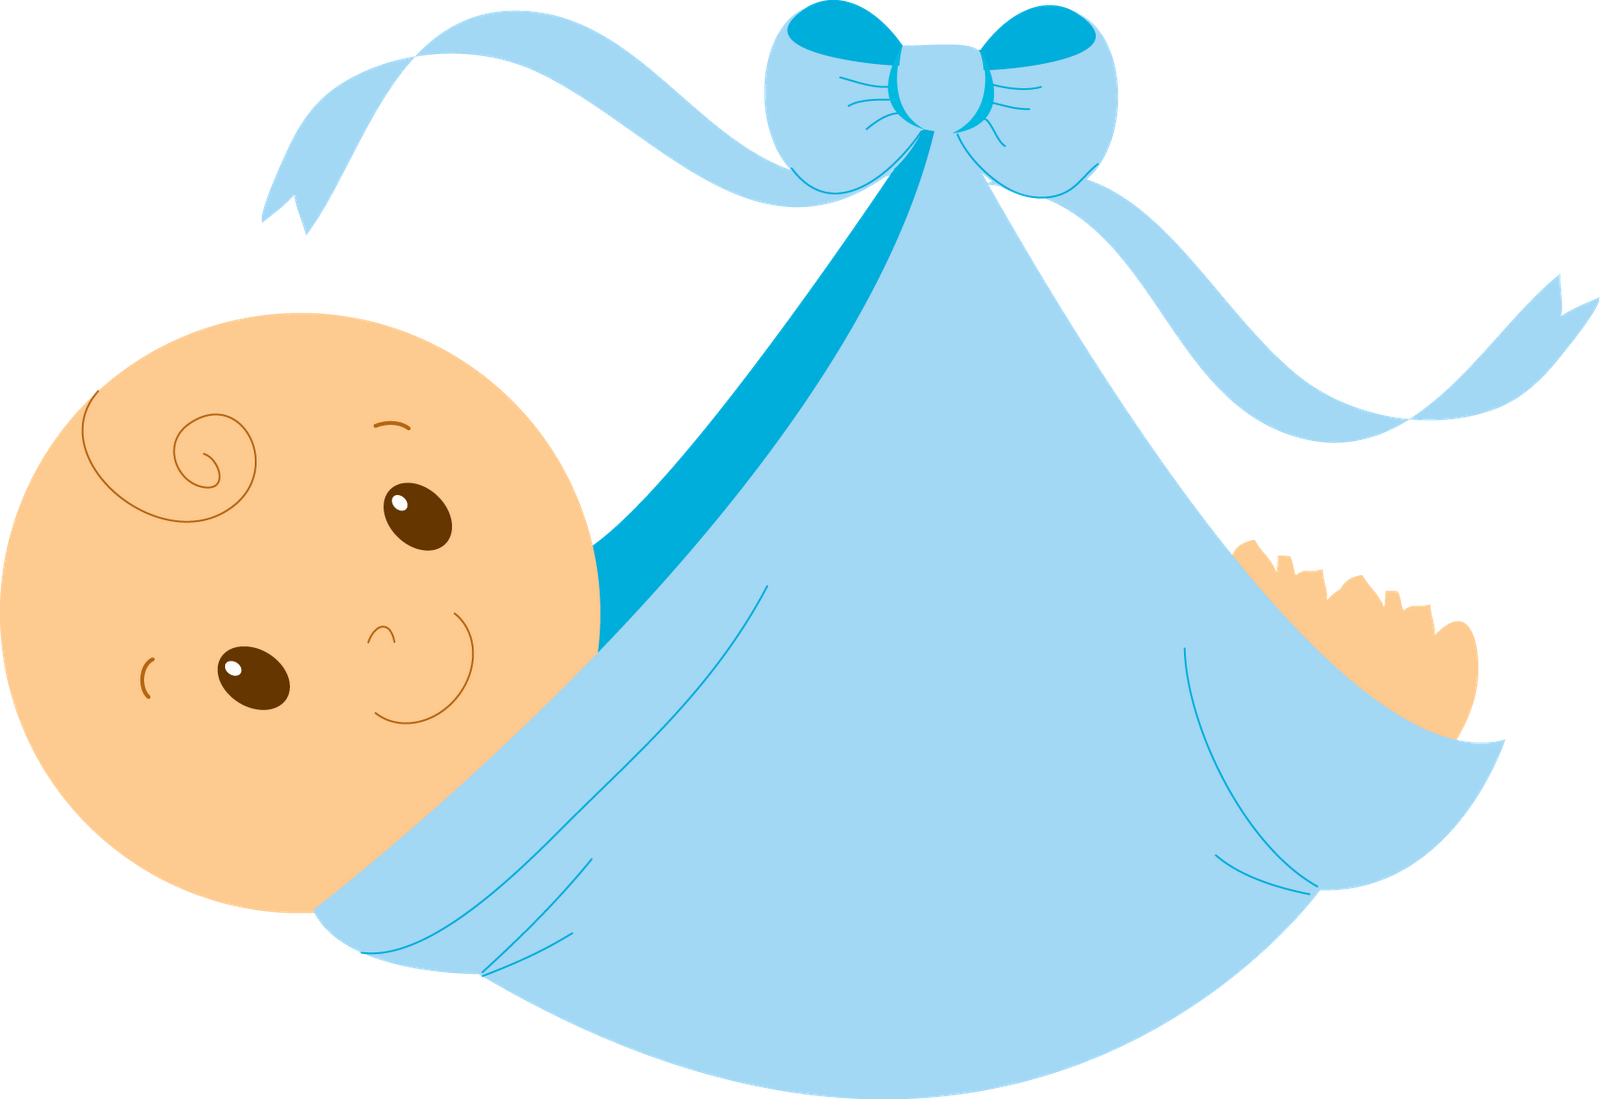 Free Baby Sleeping Clipart, Download Free Clip Art, Free.